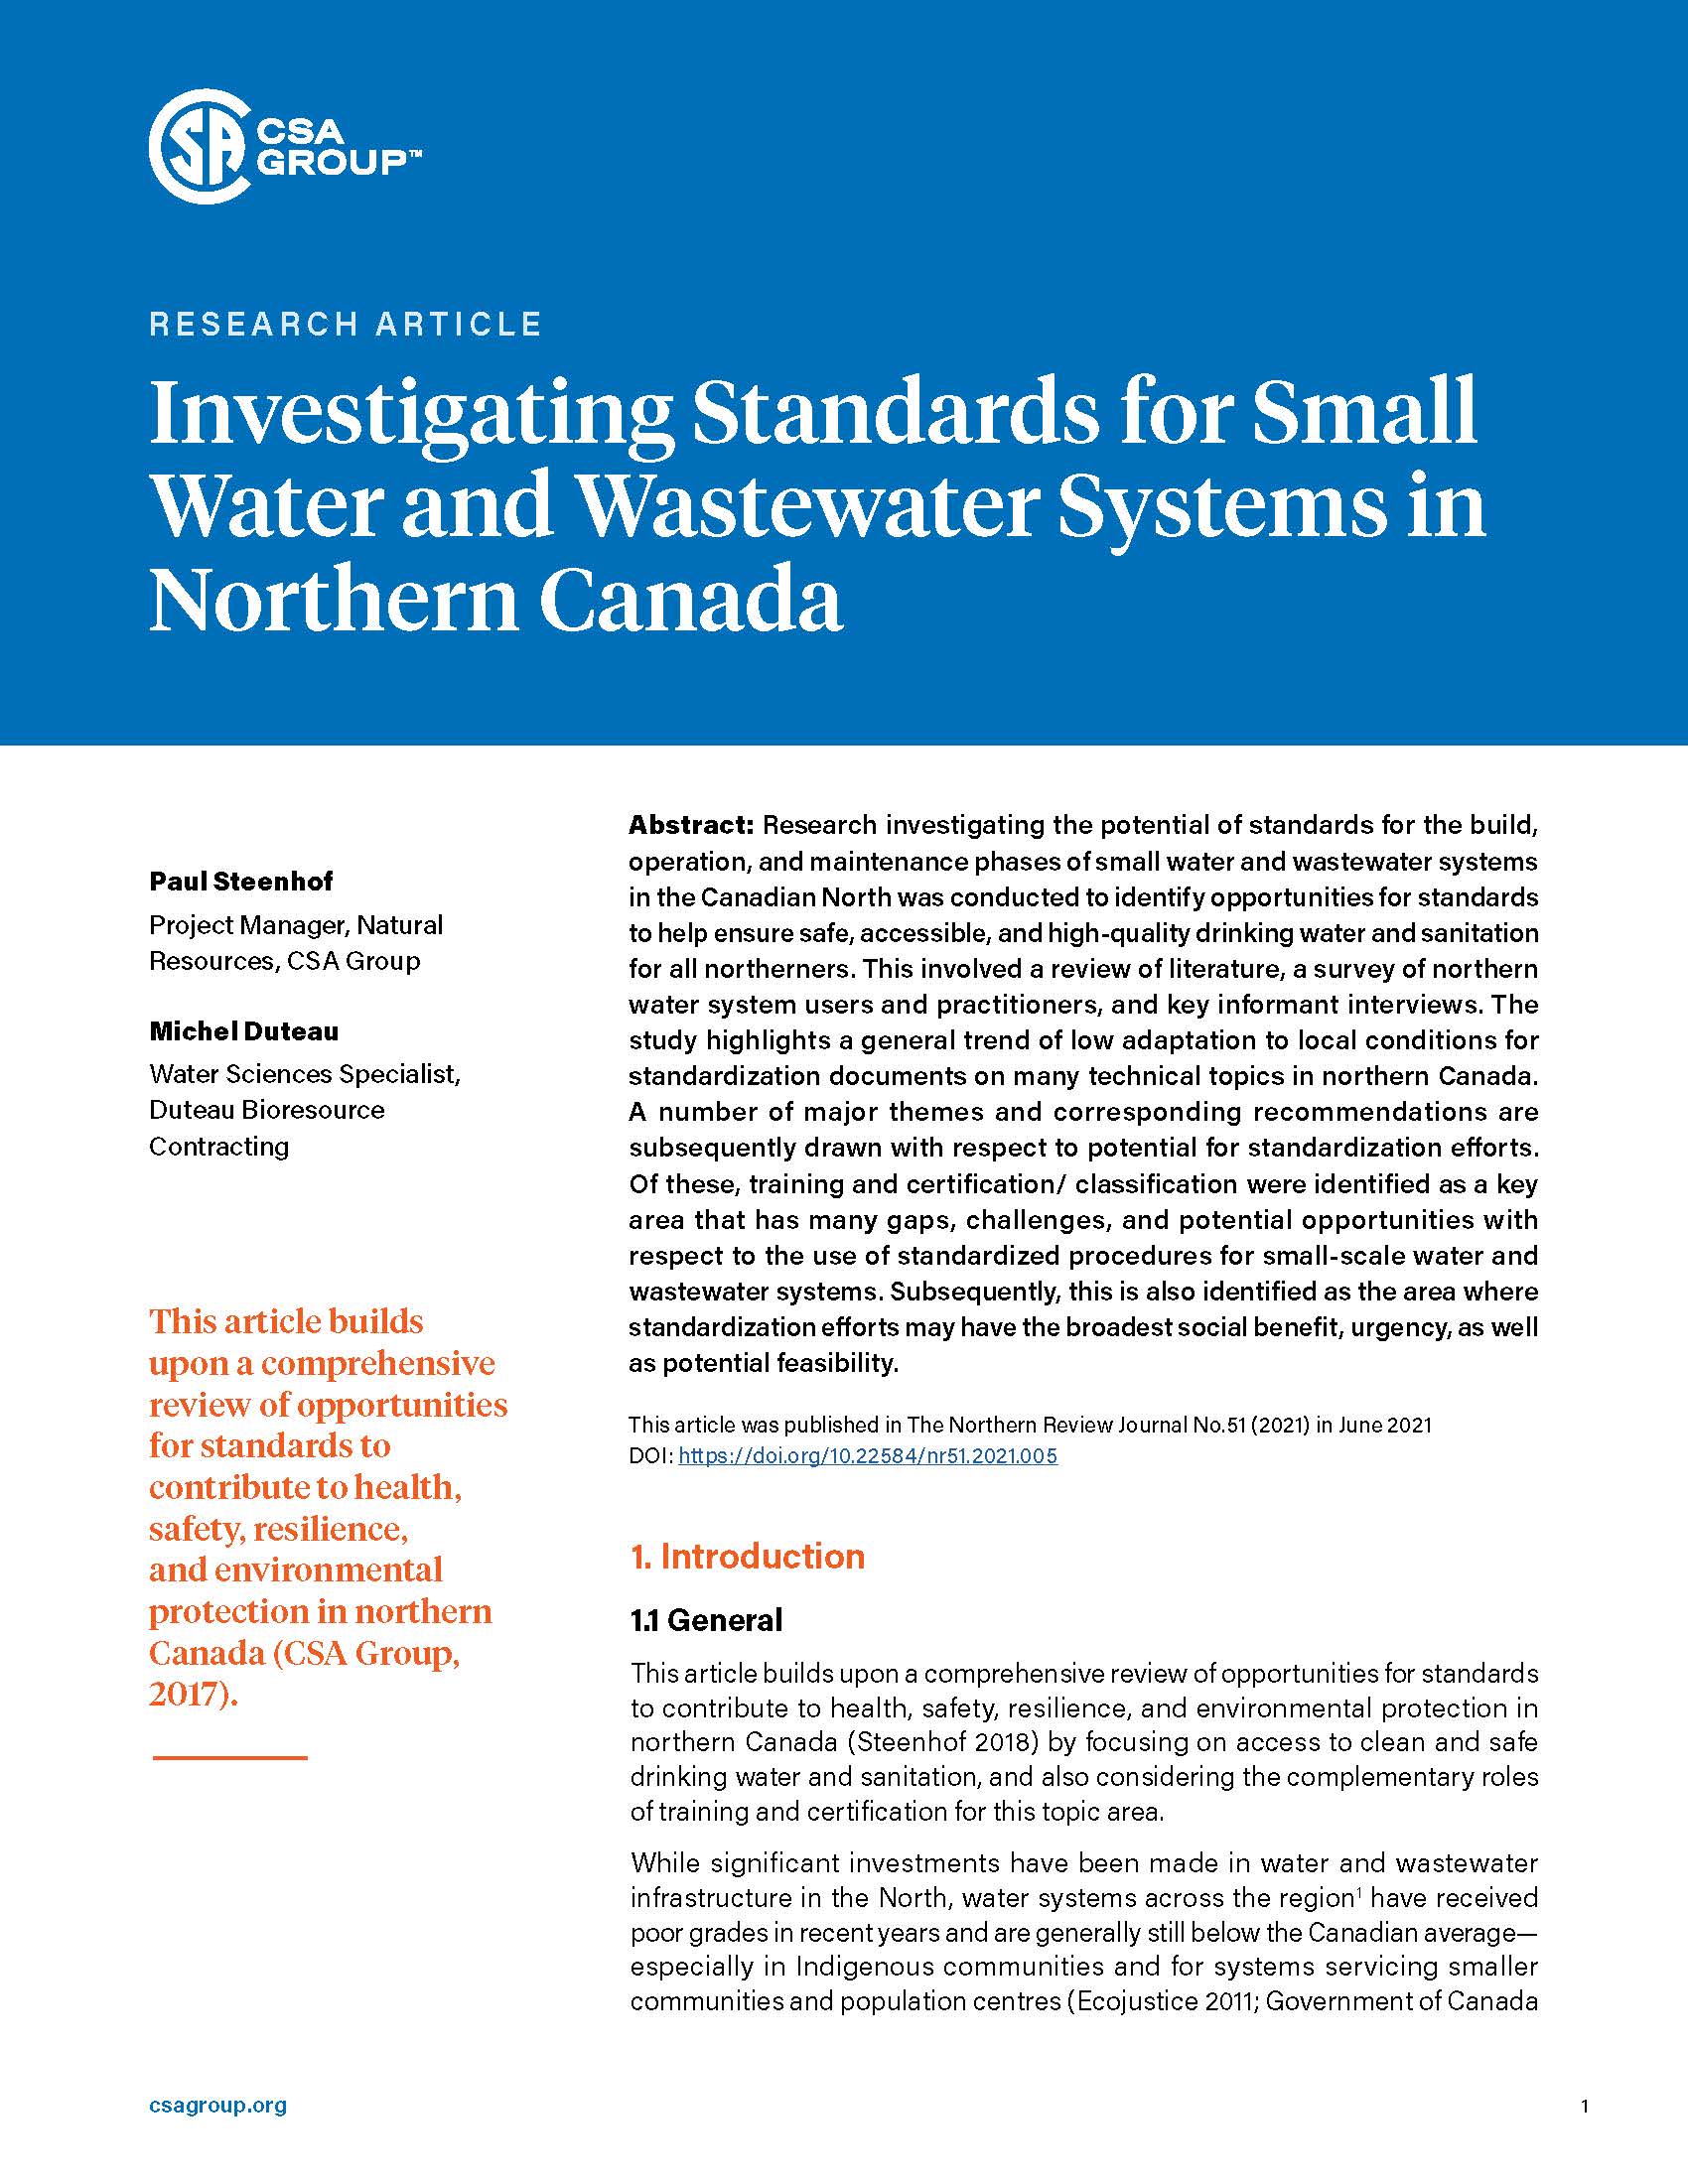 Investigating Standards for Small Water and Wastewater Systems in Northern Canada